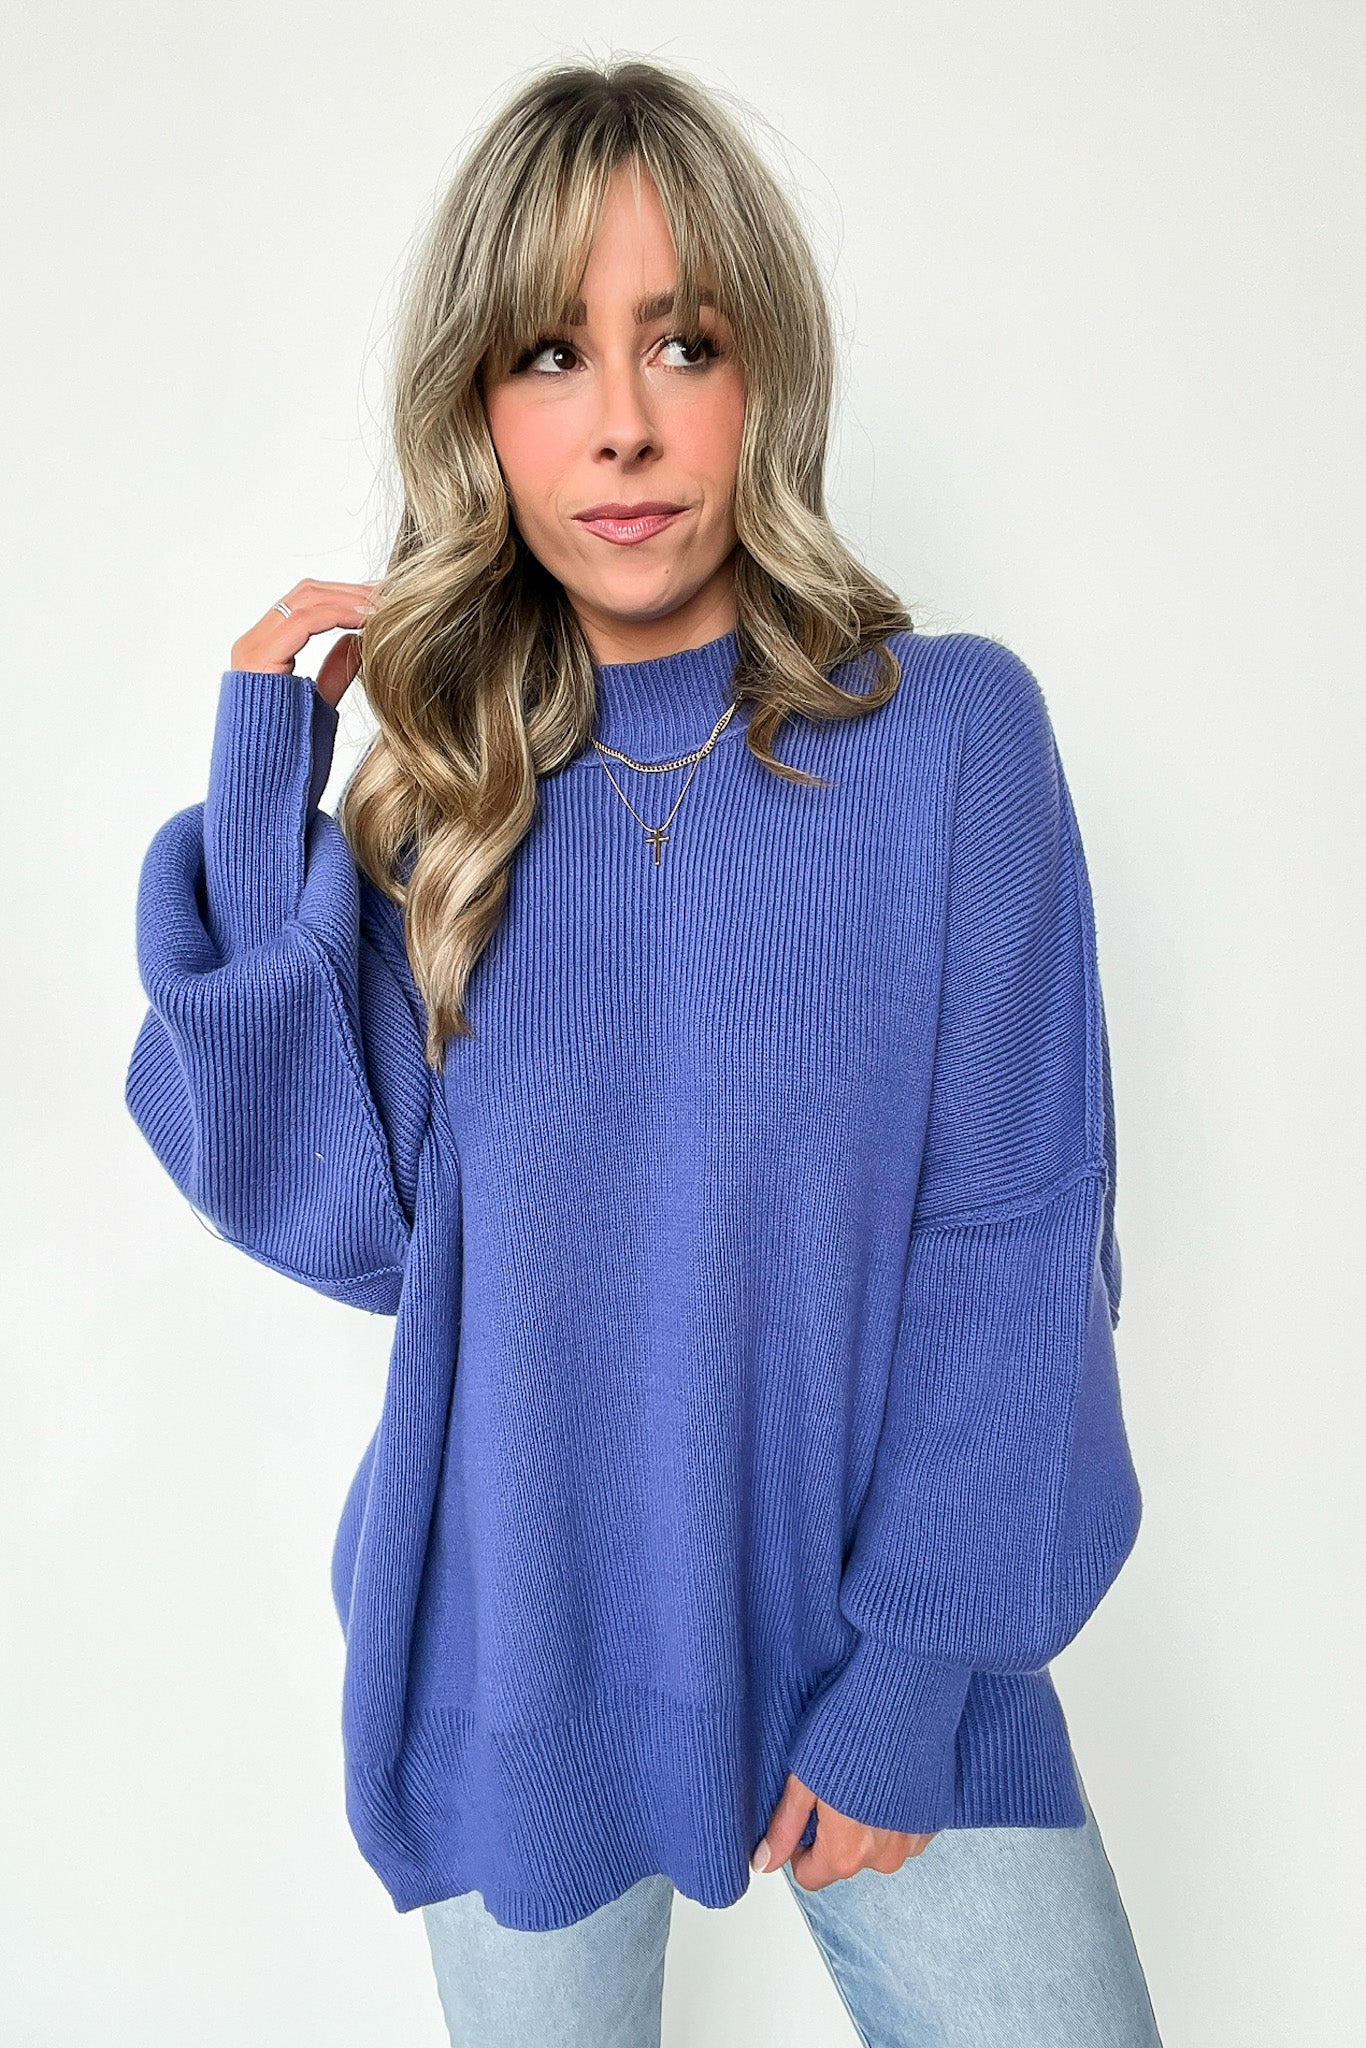 Marlin / SM Simple Street Side Slit Oversized Sweater - BACK IN STOCK - Madison and Mallory